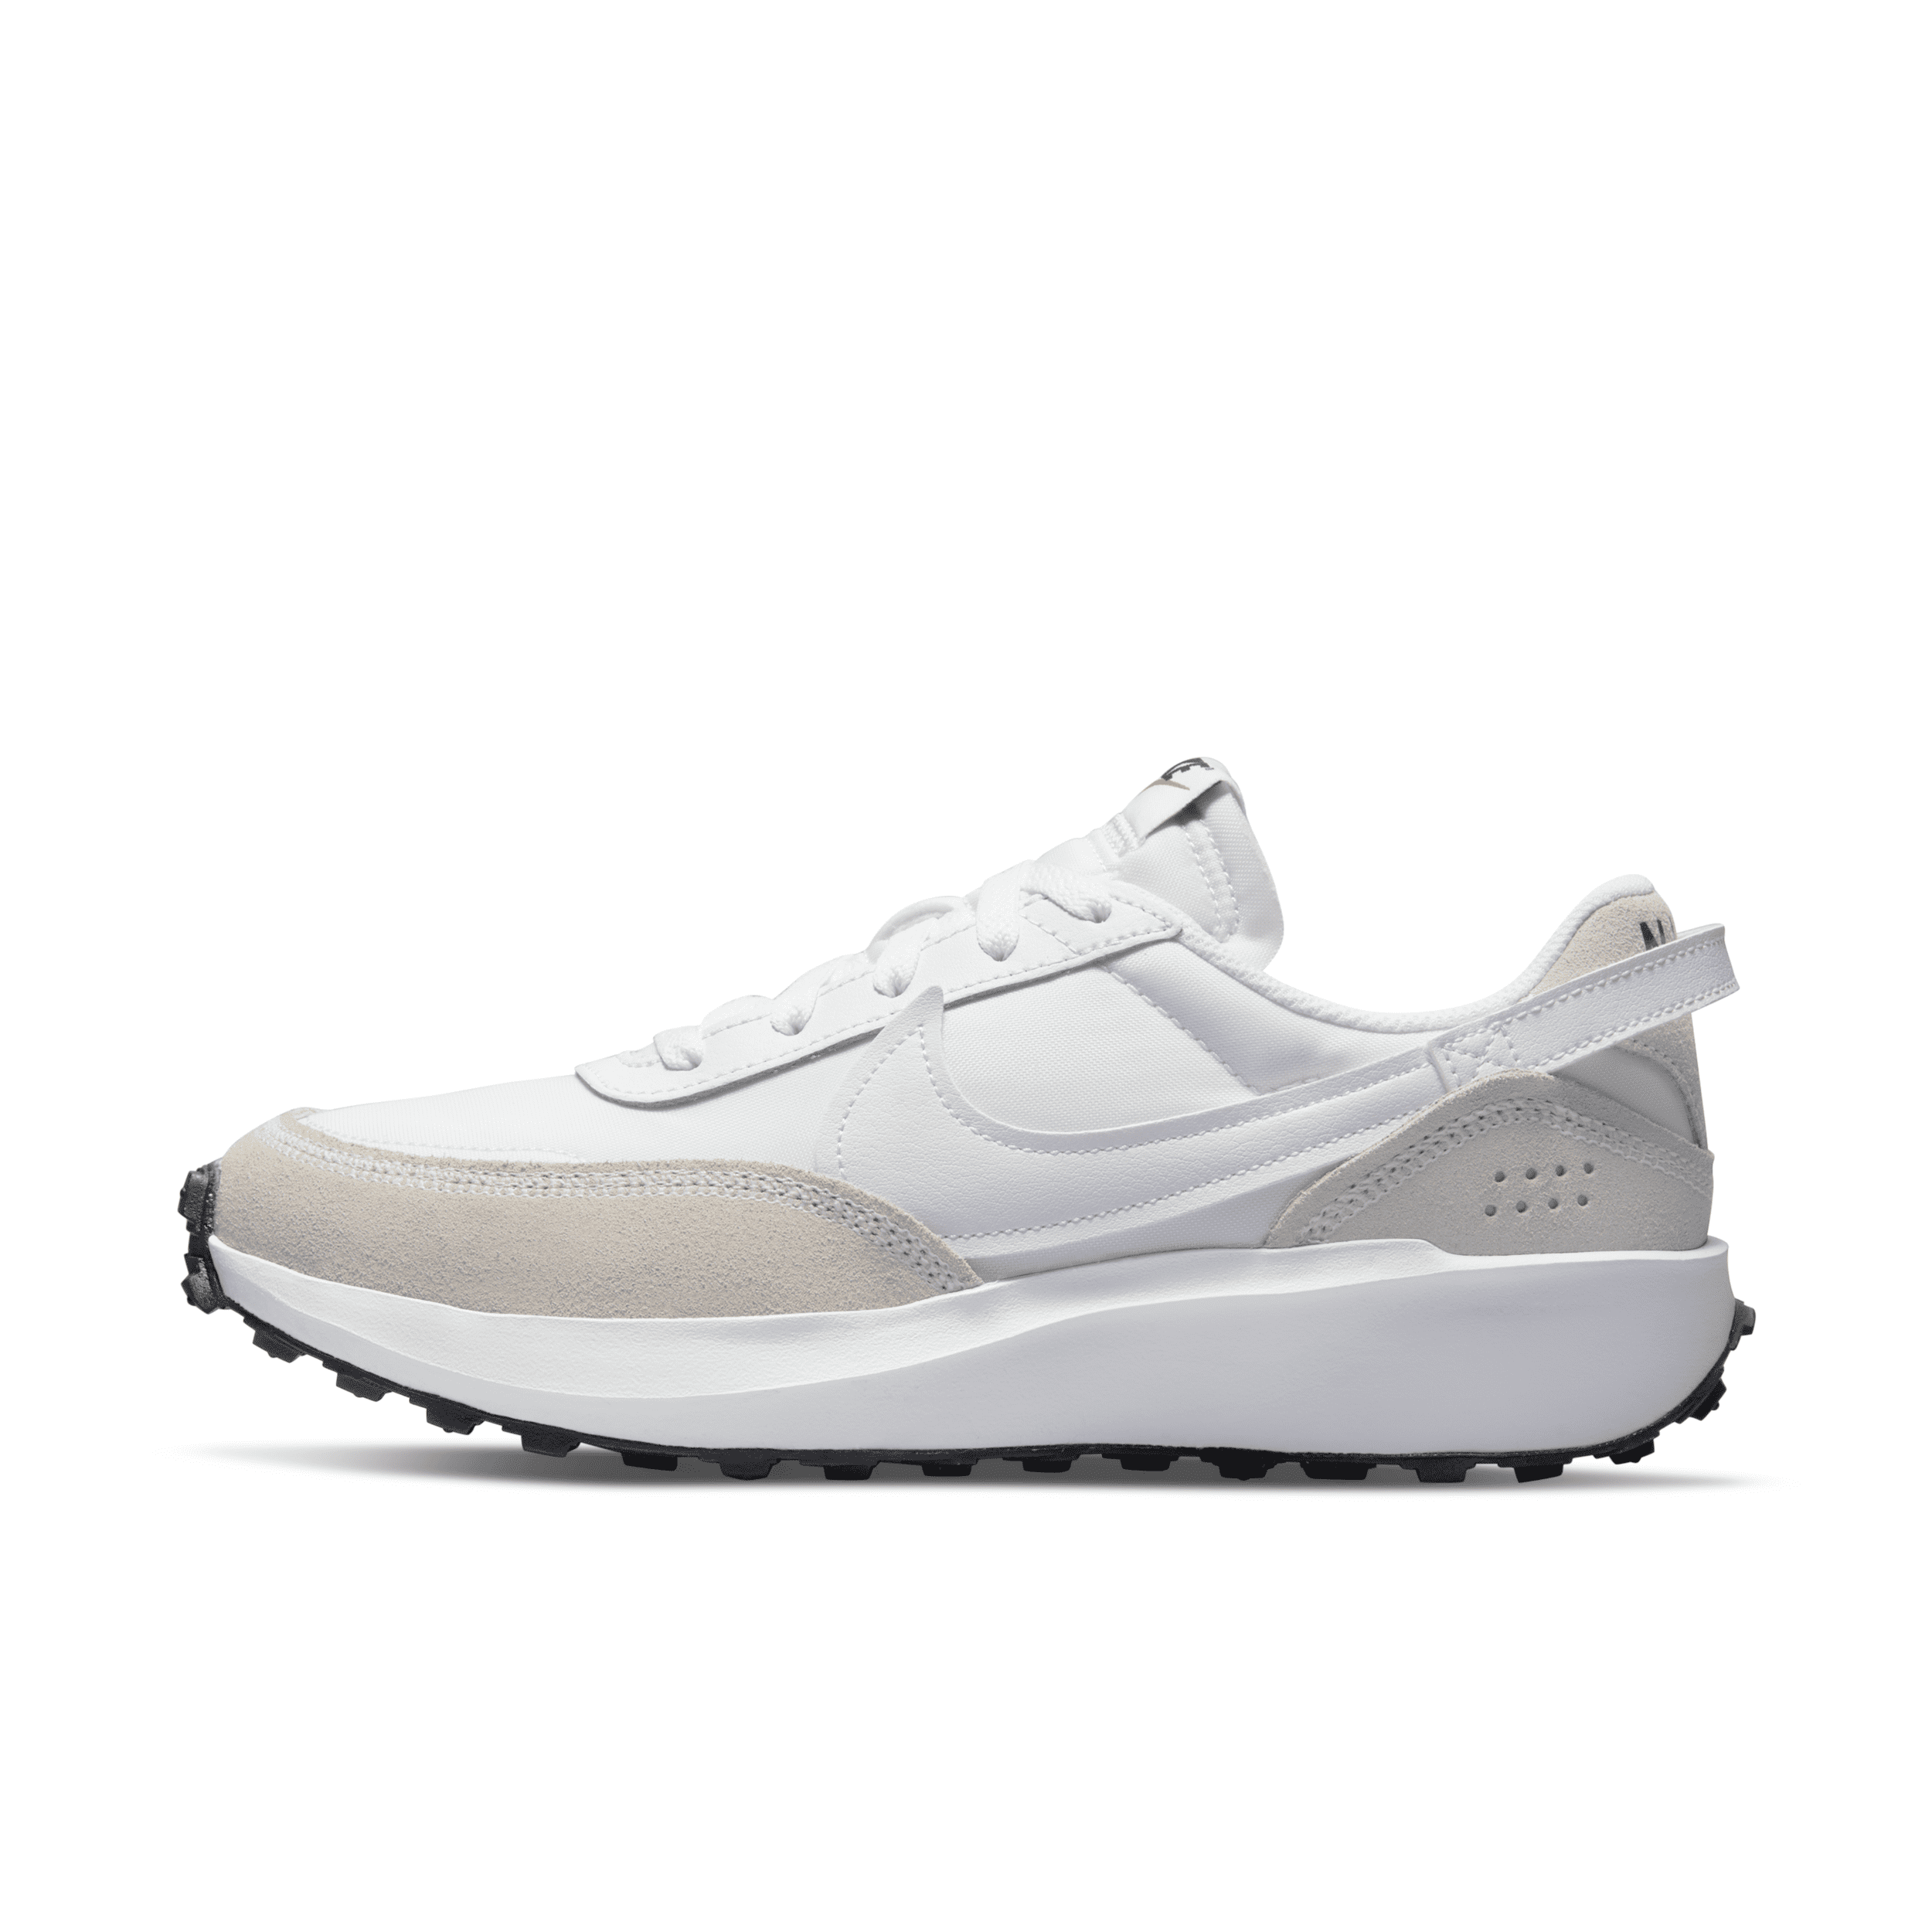 Nike Women's Waffle Debut Shoes in White, Size: 6.5 | DH9523-100